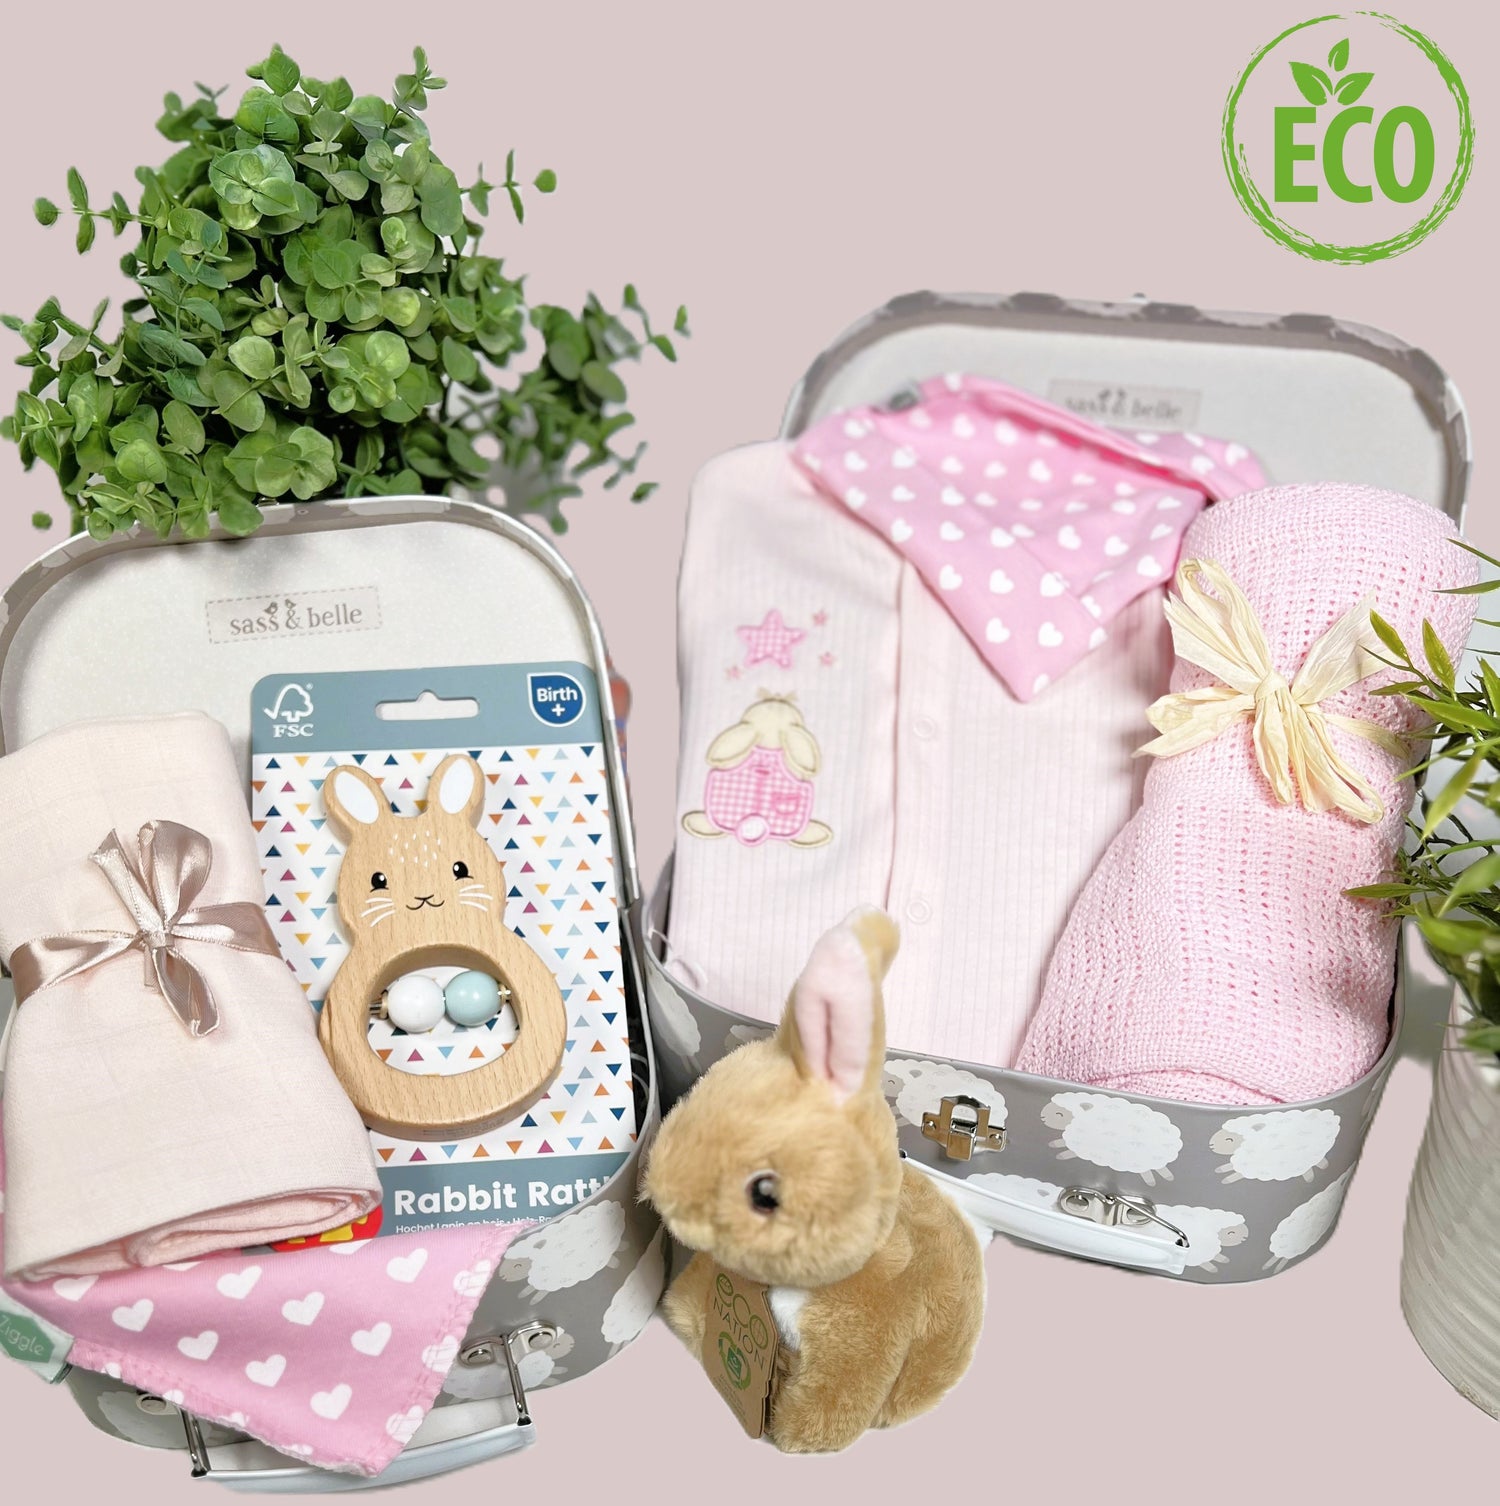 Eco Friendly pink and white baby girl gift contains a pink cotton ribbed baby sleepsuit wit an applique rabbit looking at a star, a pink cotton cellular baby blanket,a FSC wooden bunny shaped baby rattle, an eco friendly bunny soft toy, a coton baby bib and matching baby knot hat and 2 baby keepsake cases.